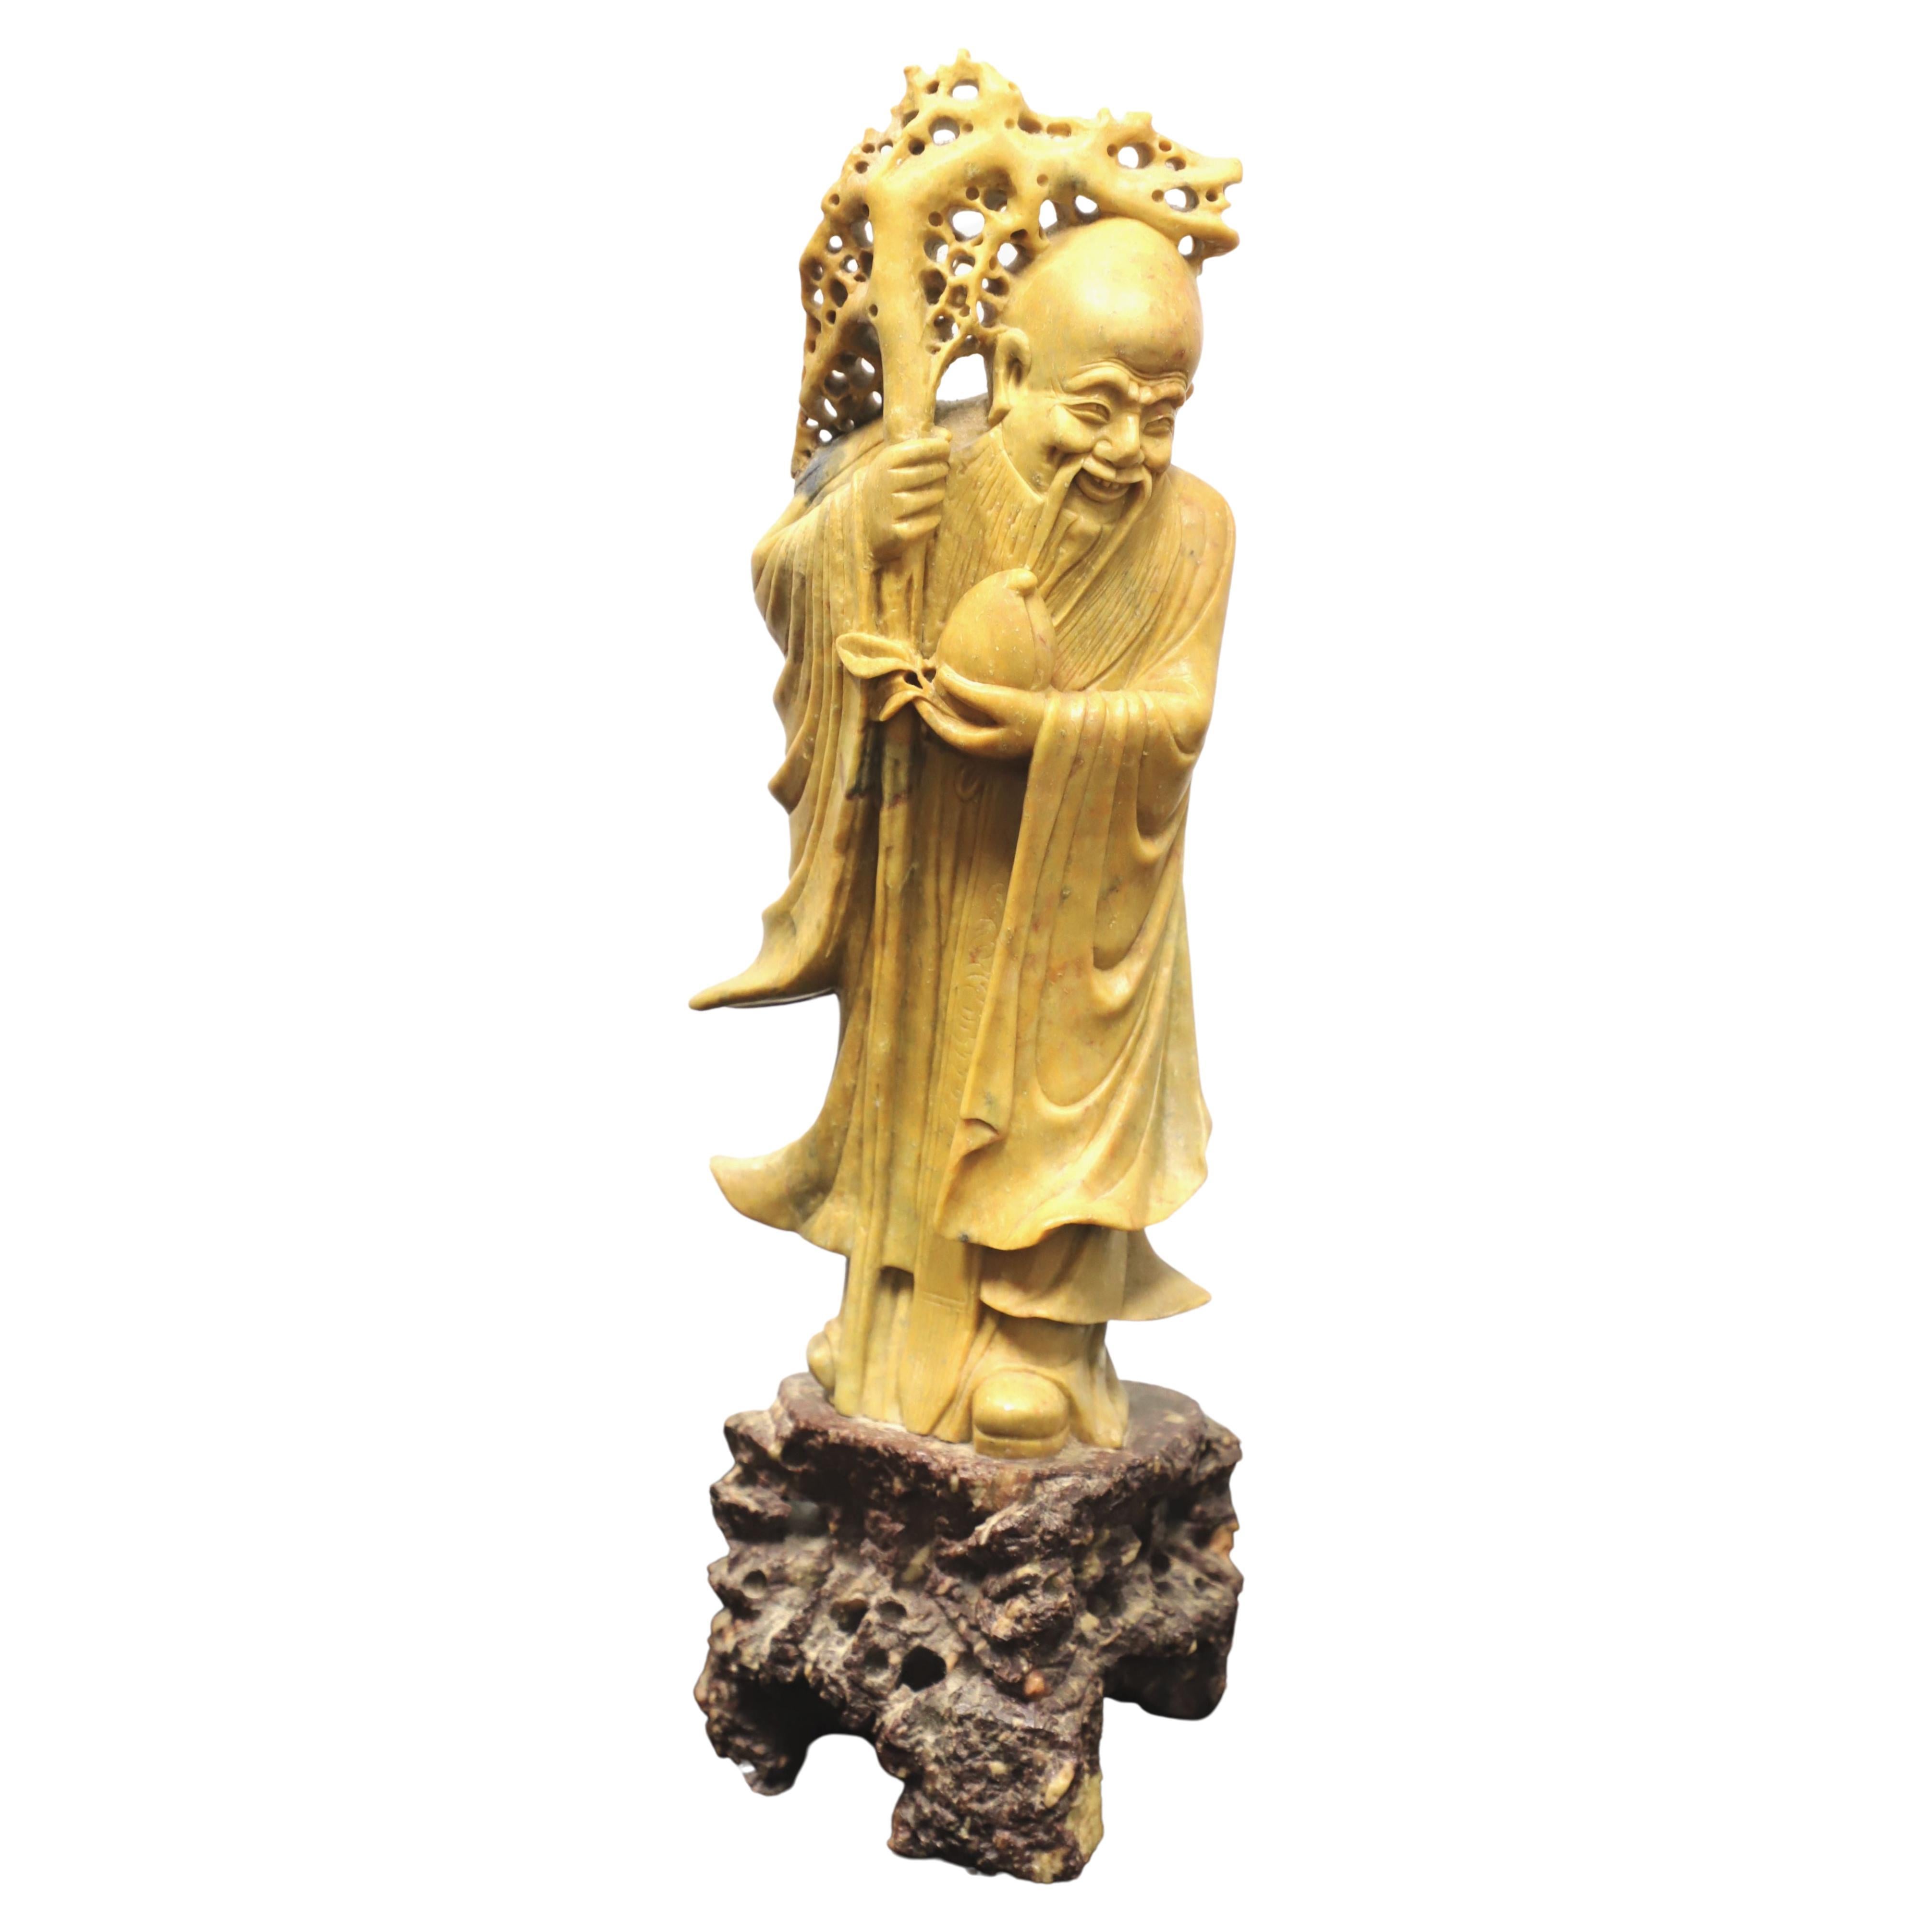 Mid 20th Century Carved Soapstone Sculpture "Shou Lao" For Sale